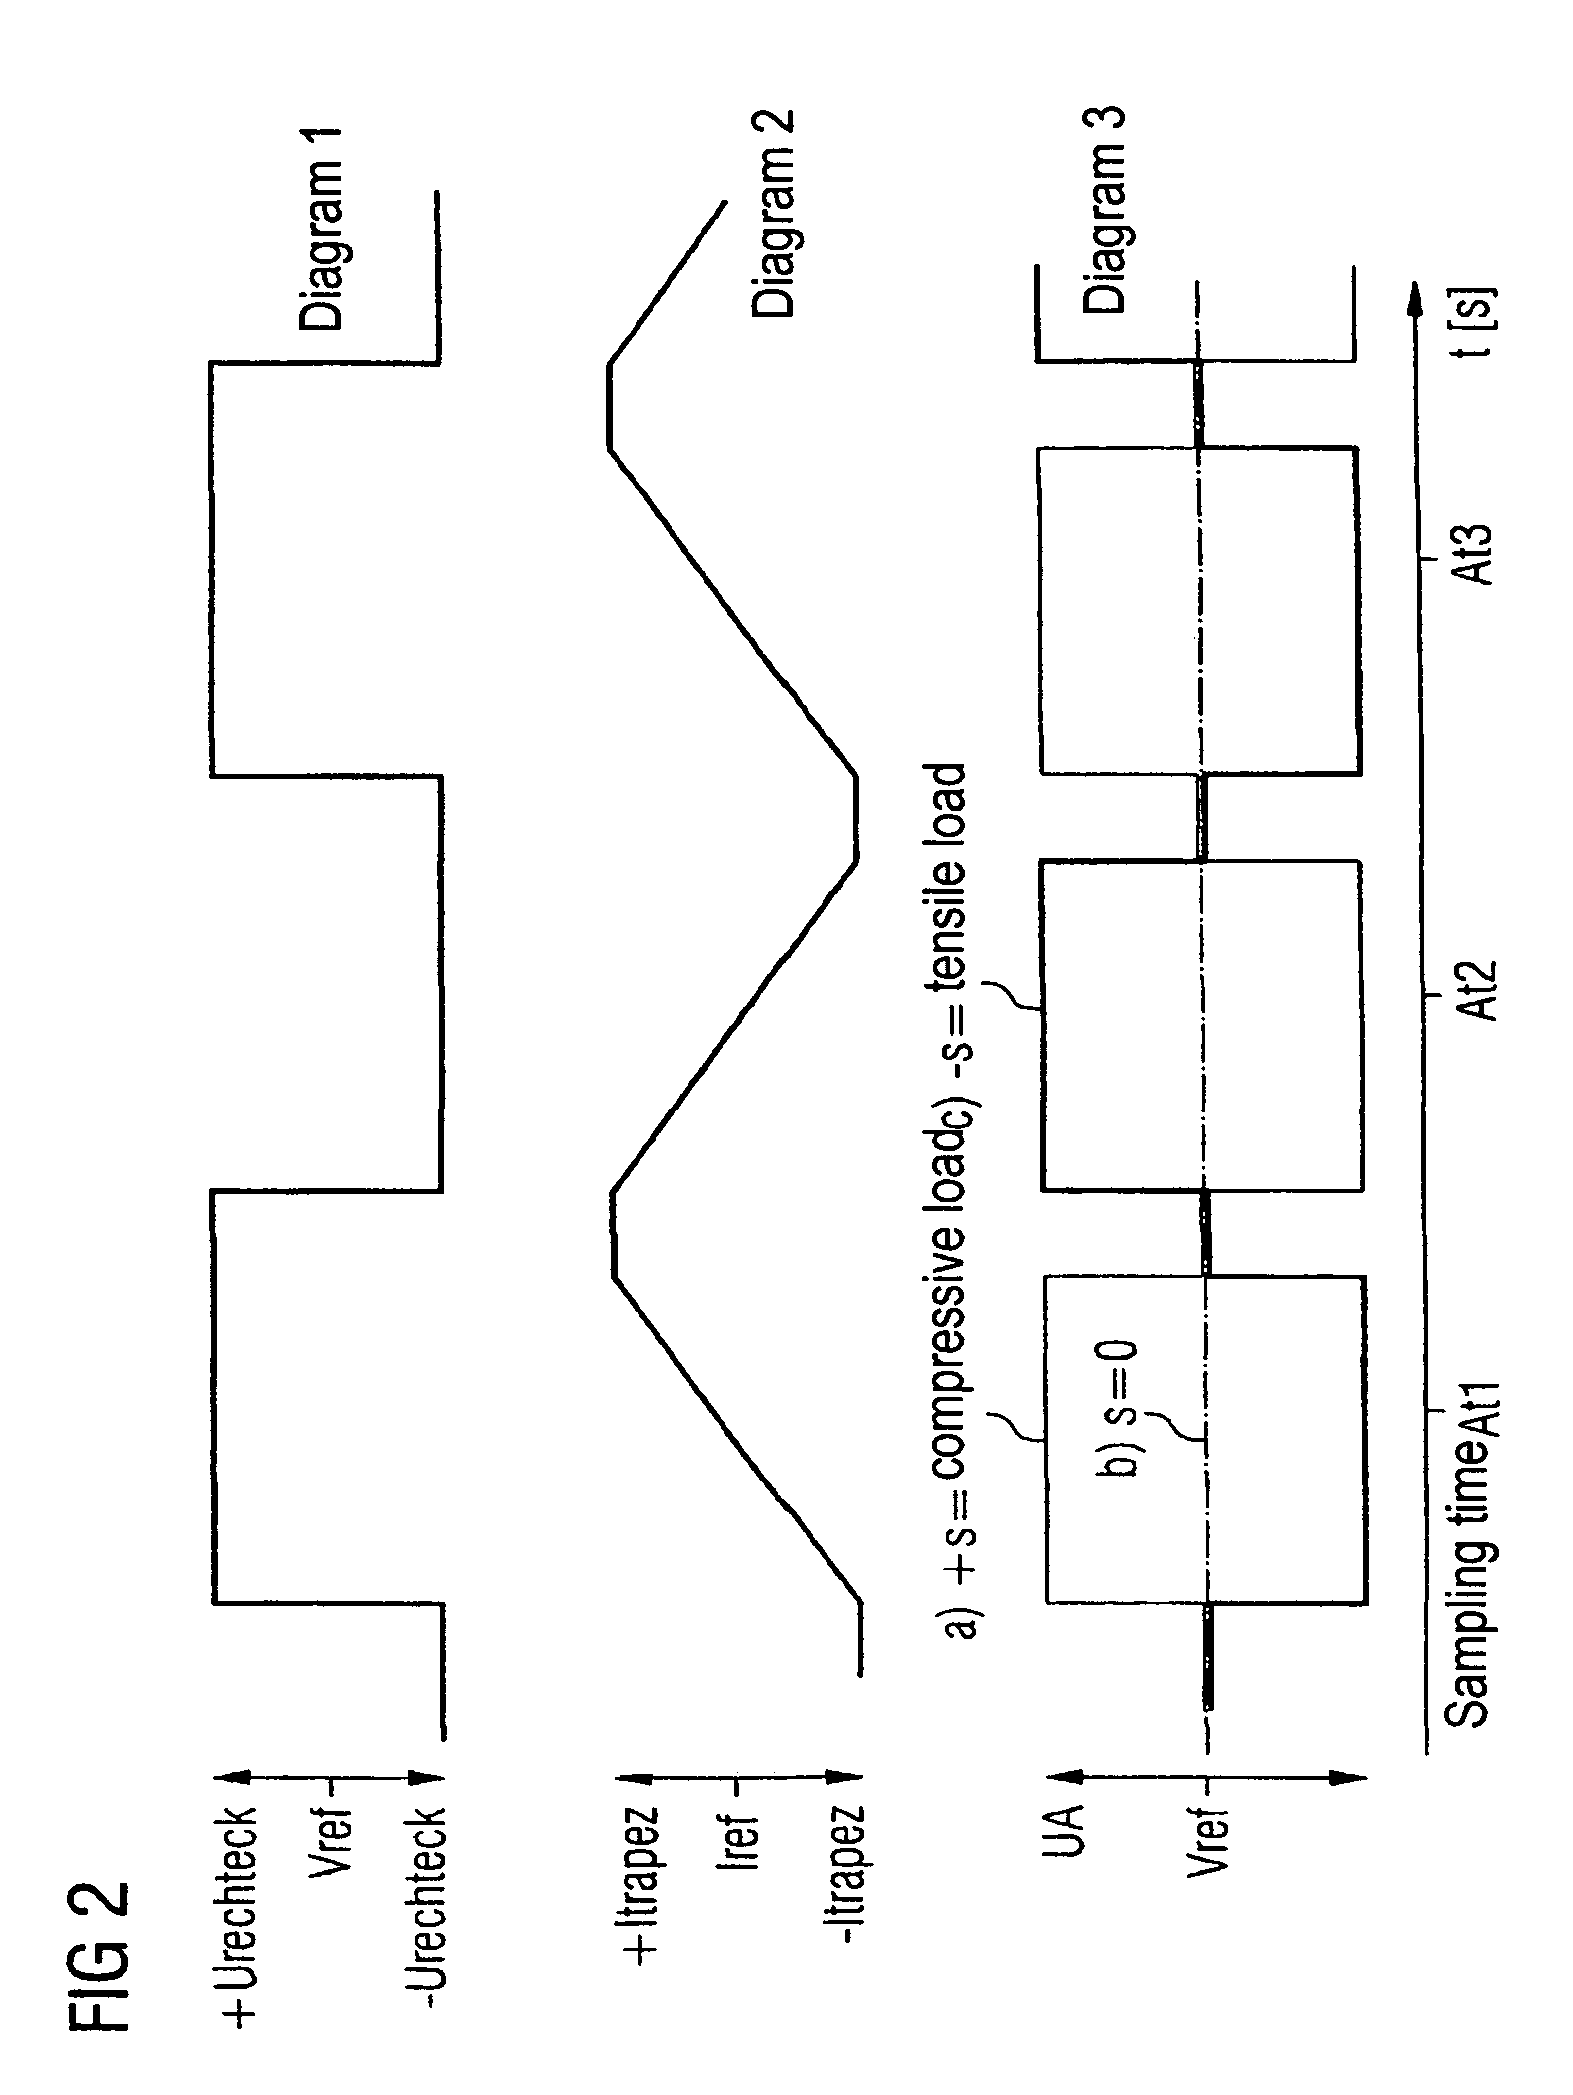 Circuit arrangement with a linear variable differential transformer (LVDT) as a displacement sensor or force sensor